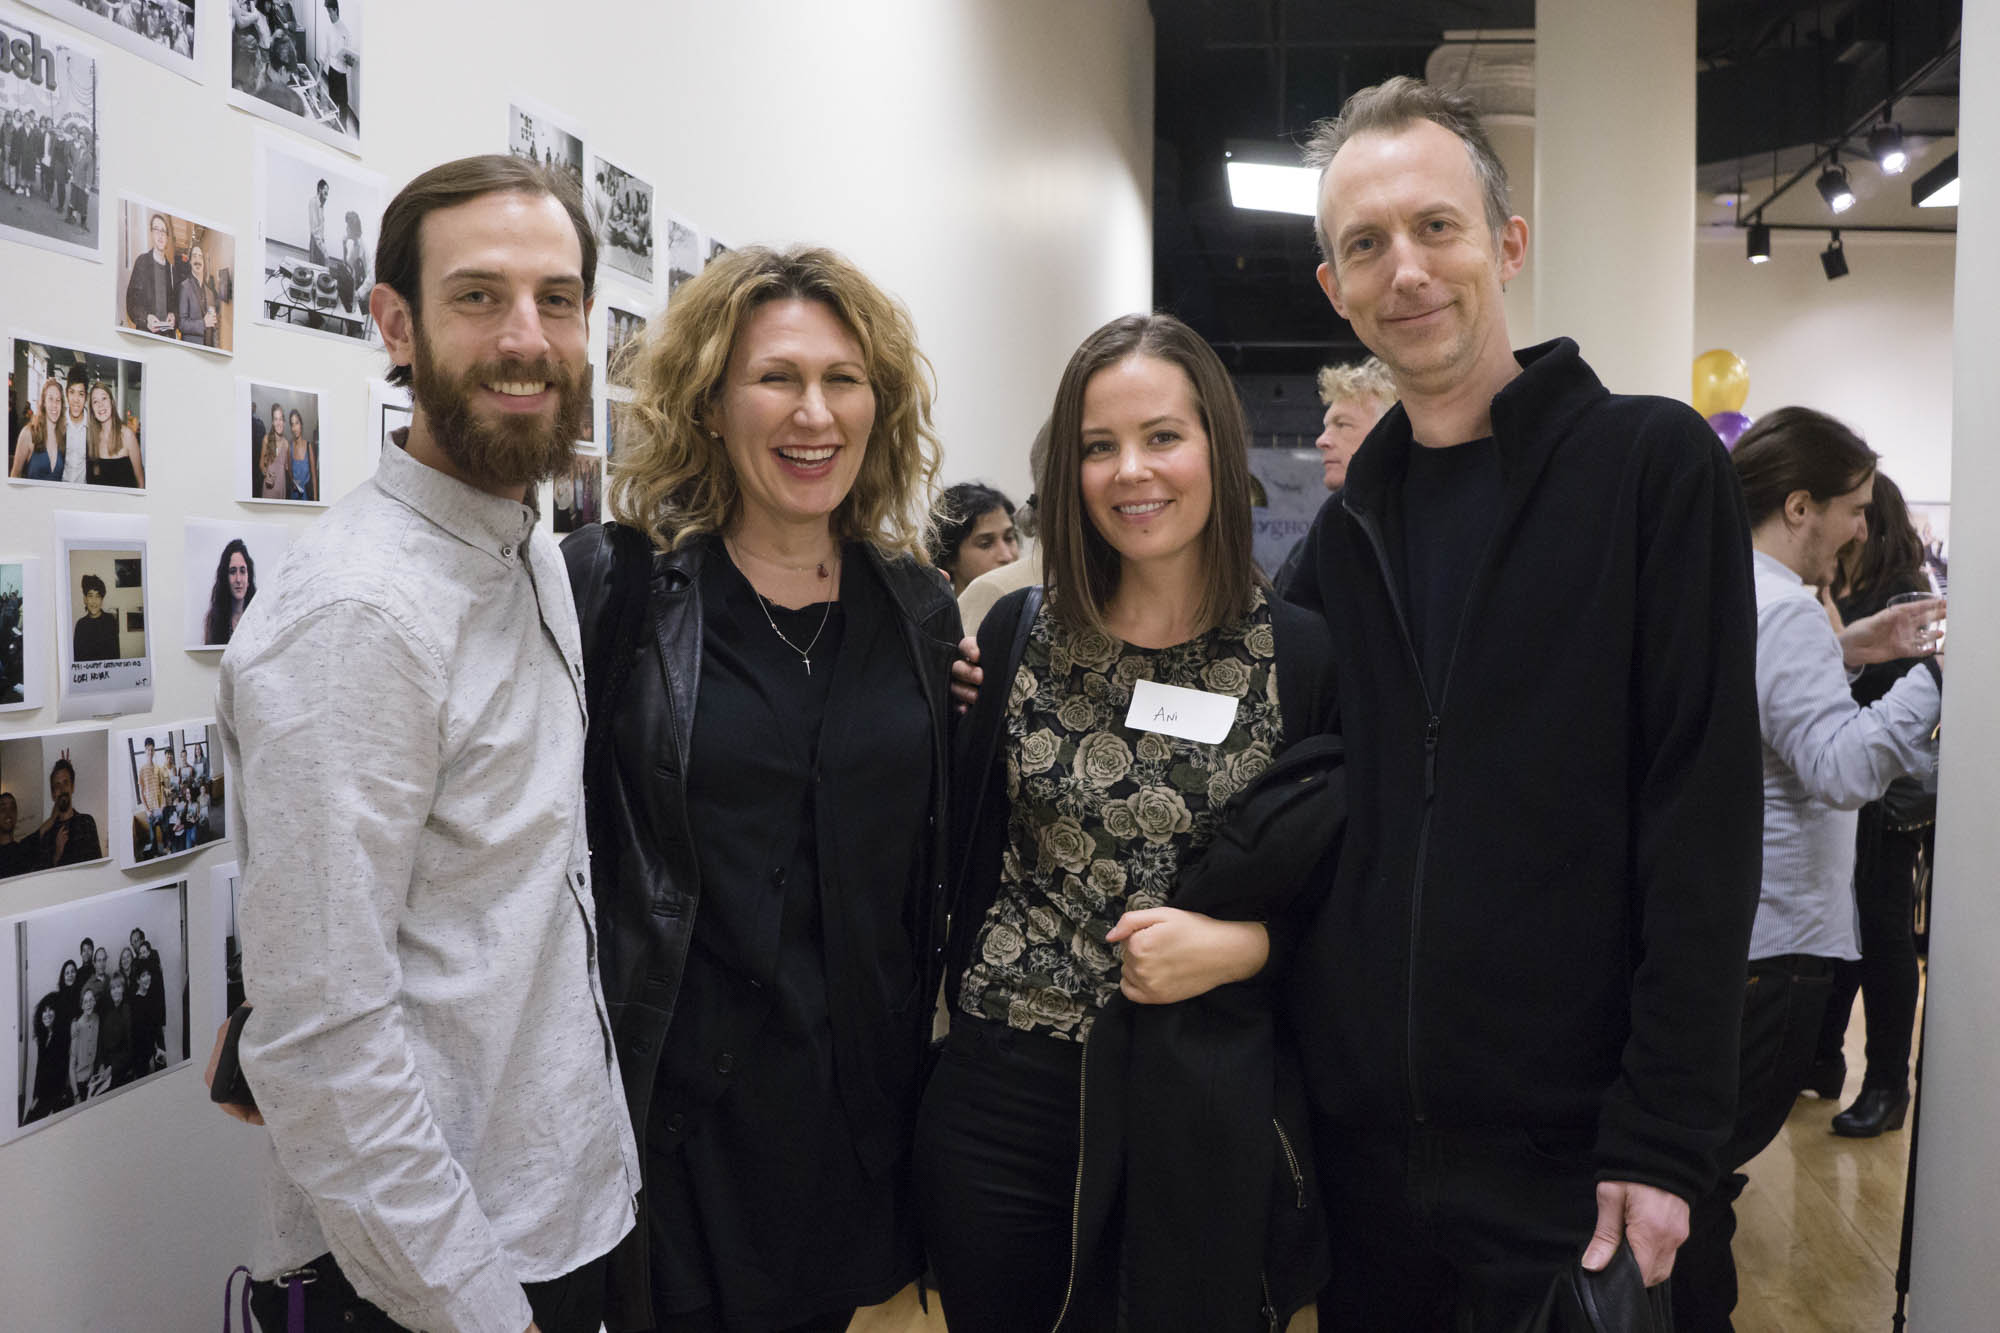 Snapshots from our October 24, 2015 Alumni Day artist panel "State of the Art(s)"